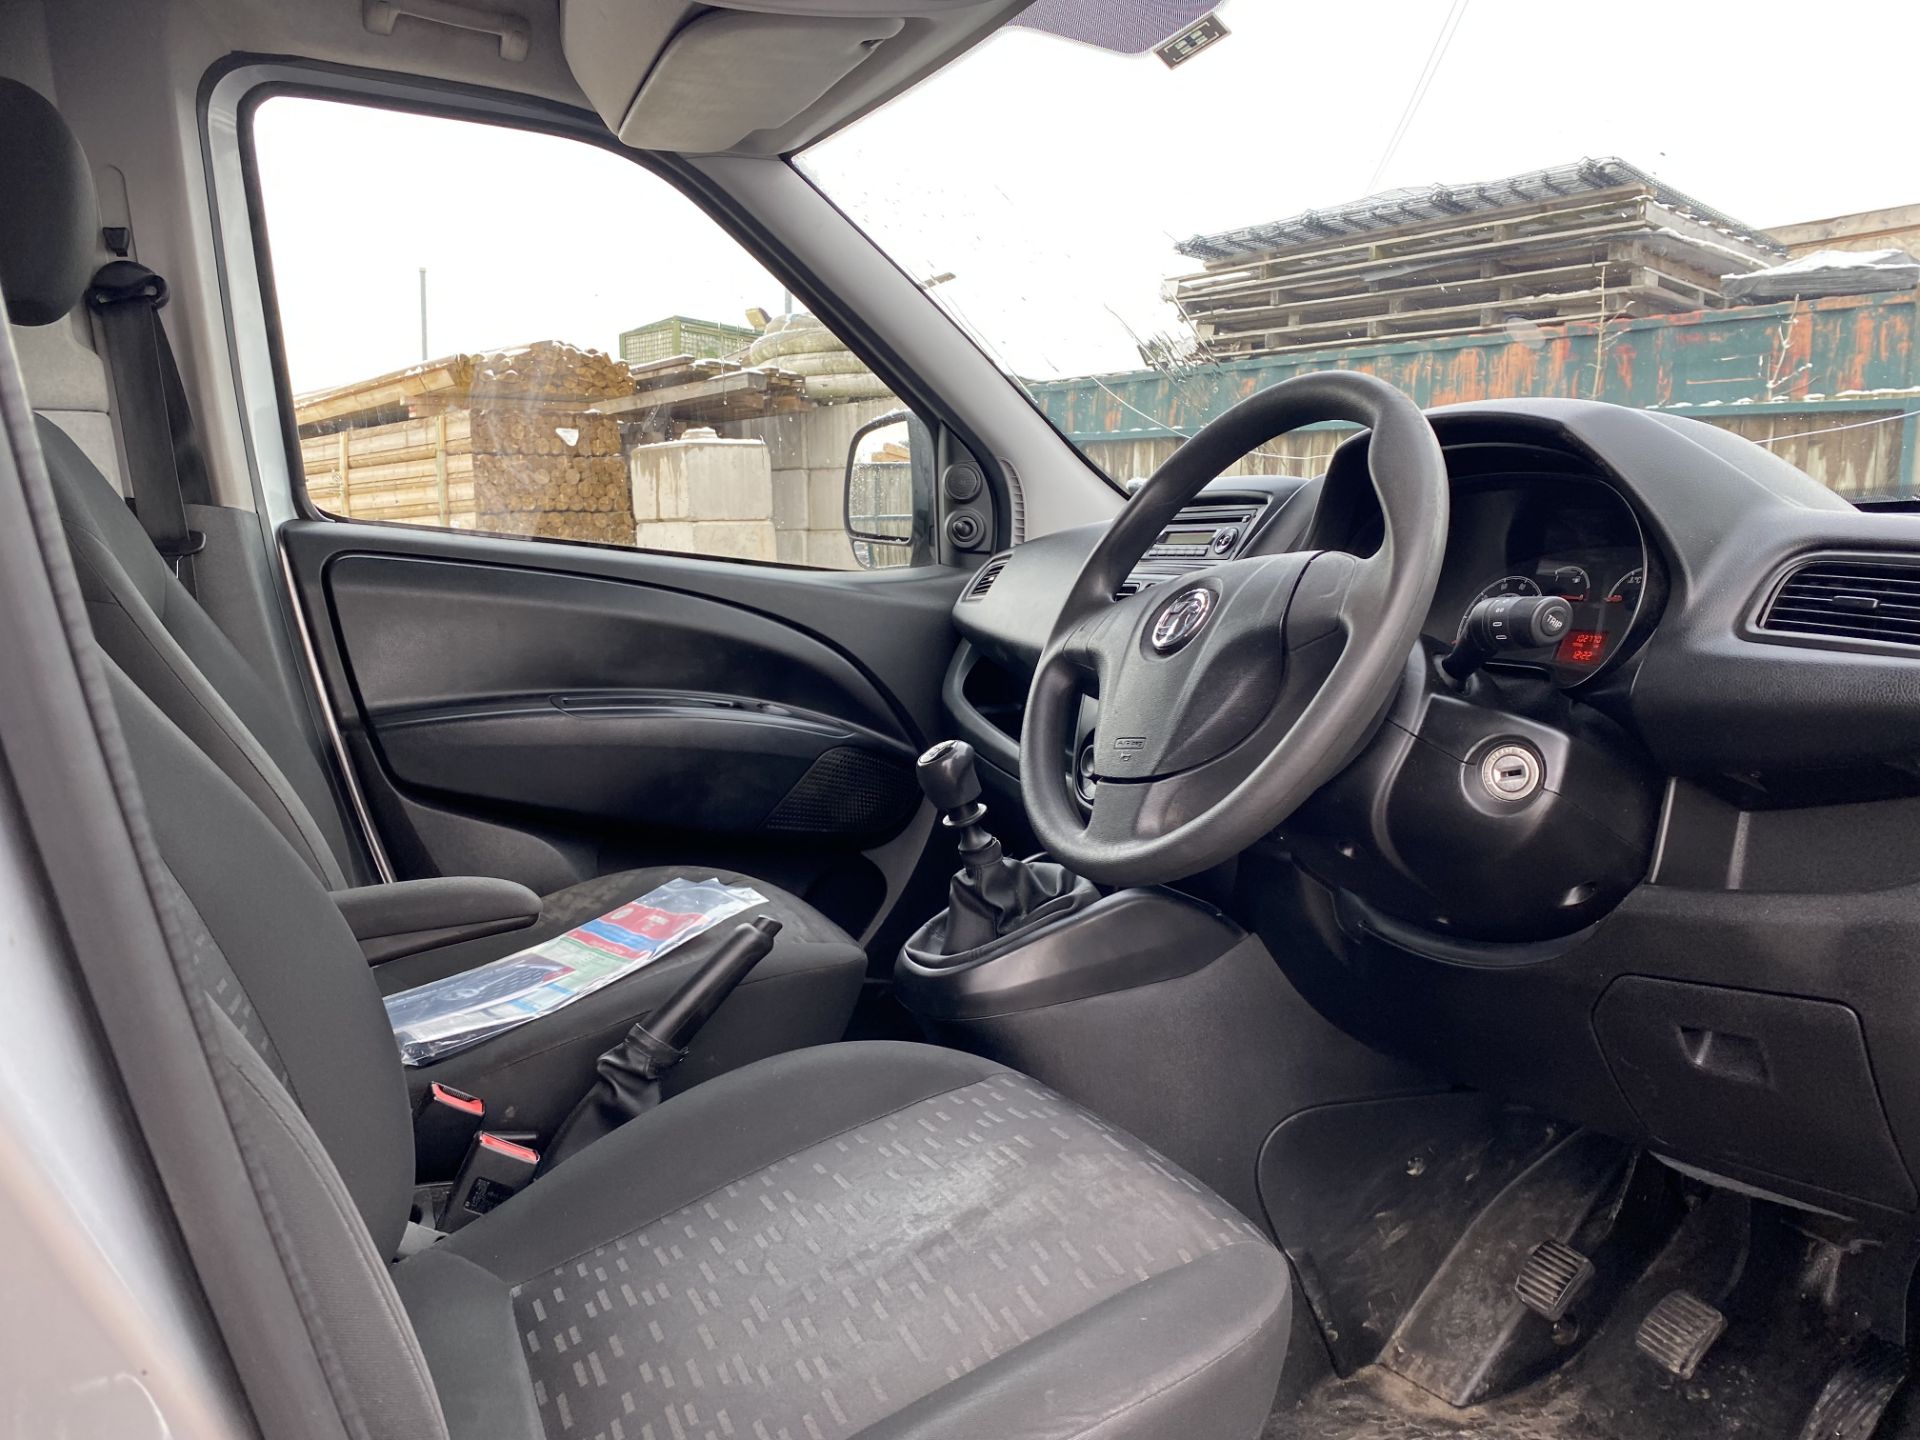 ON SALE VAUXHALL COMBO 1.6CDTI 16v LWB (105) "SPORTIVE" (2019 MODEL) 1 KEEPER - AIR CON - EURO 6 - Image 13 of 21